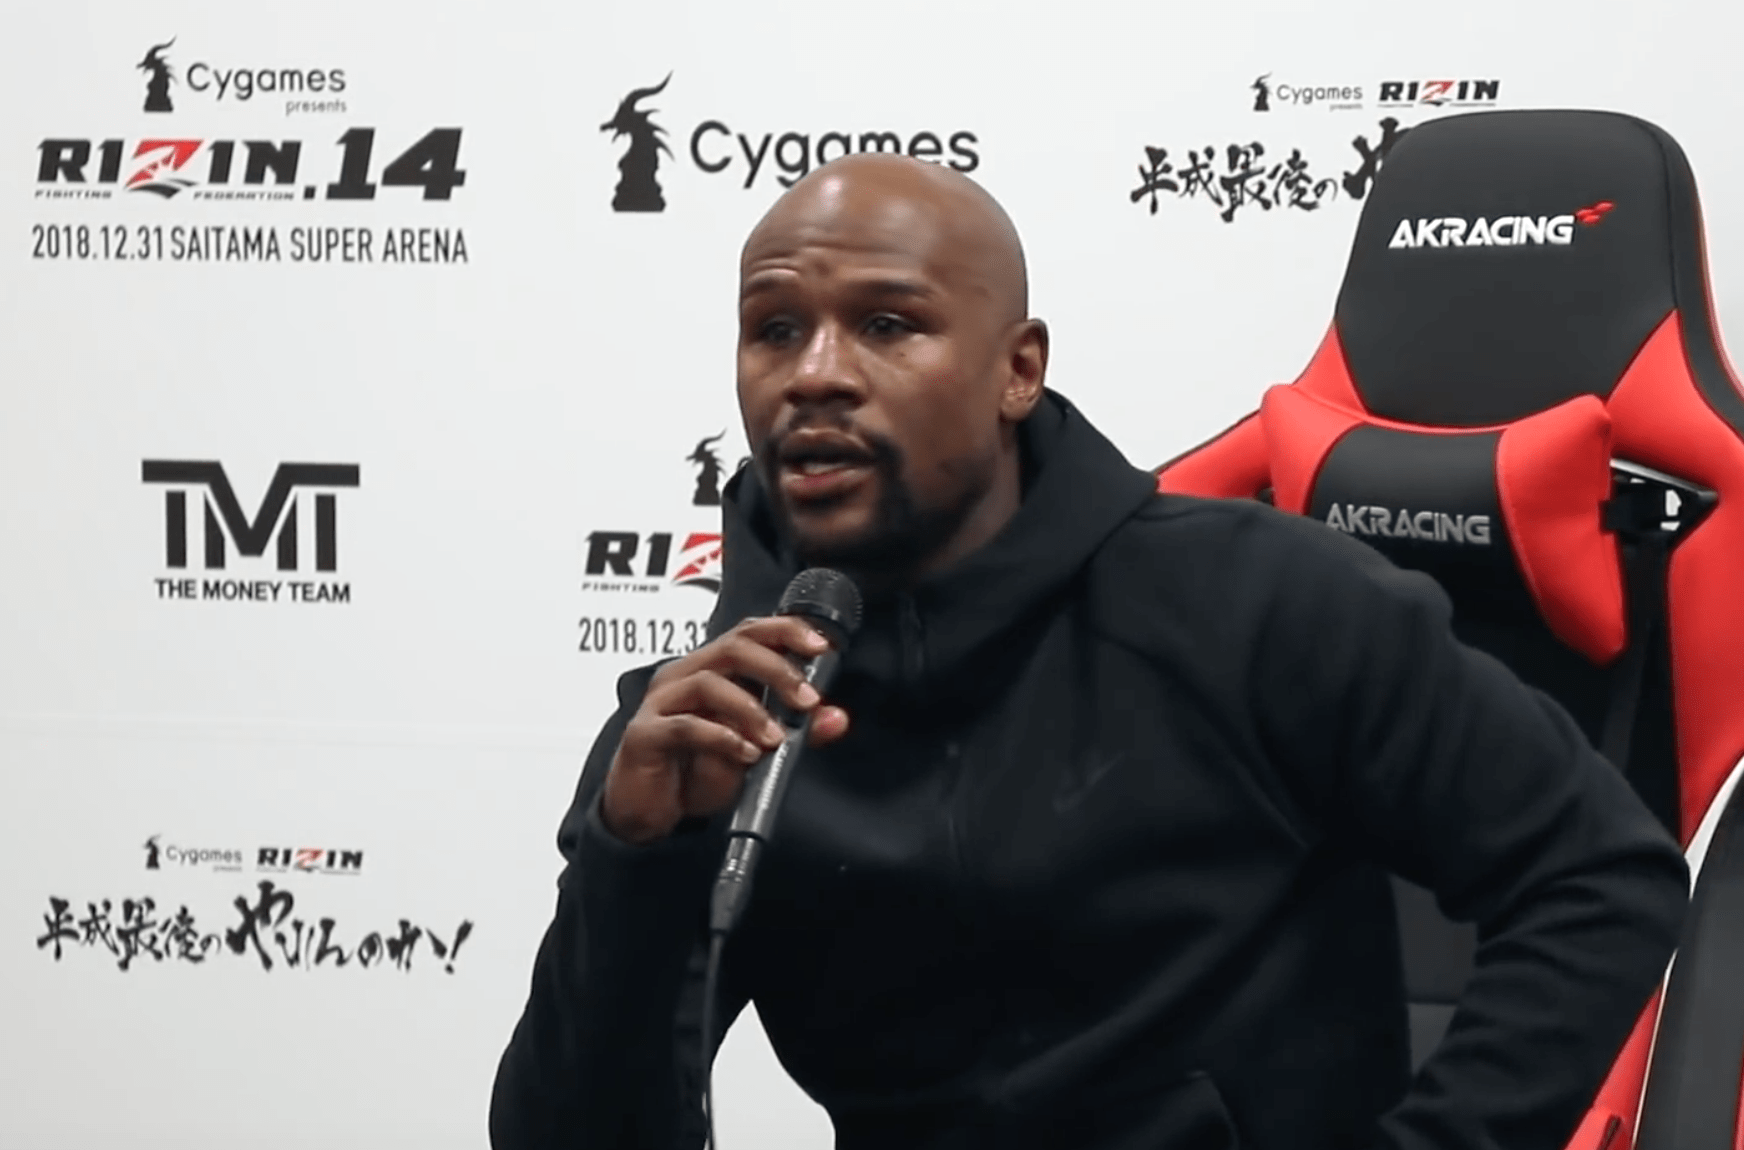 Full Floyd Mayweather Post Fight Press Conference At Rizin 14